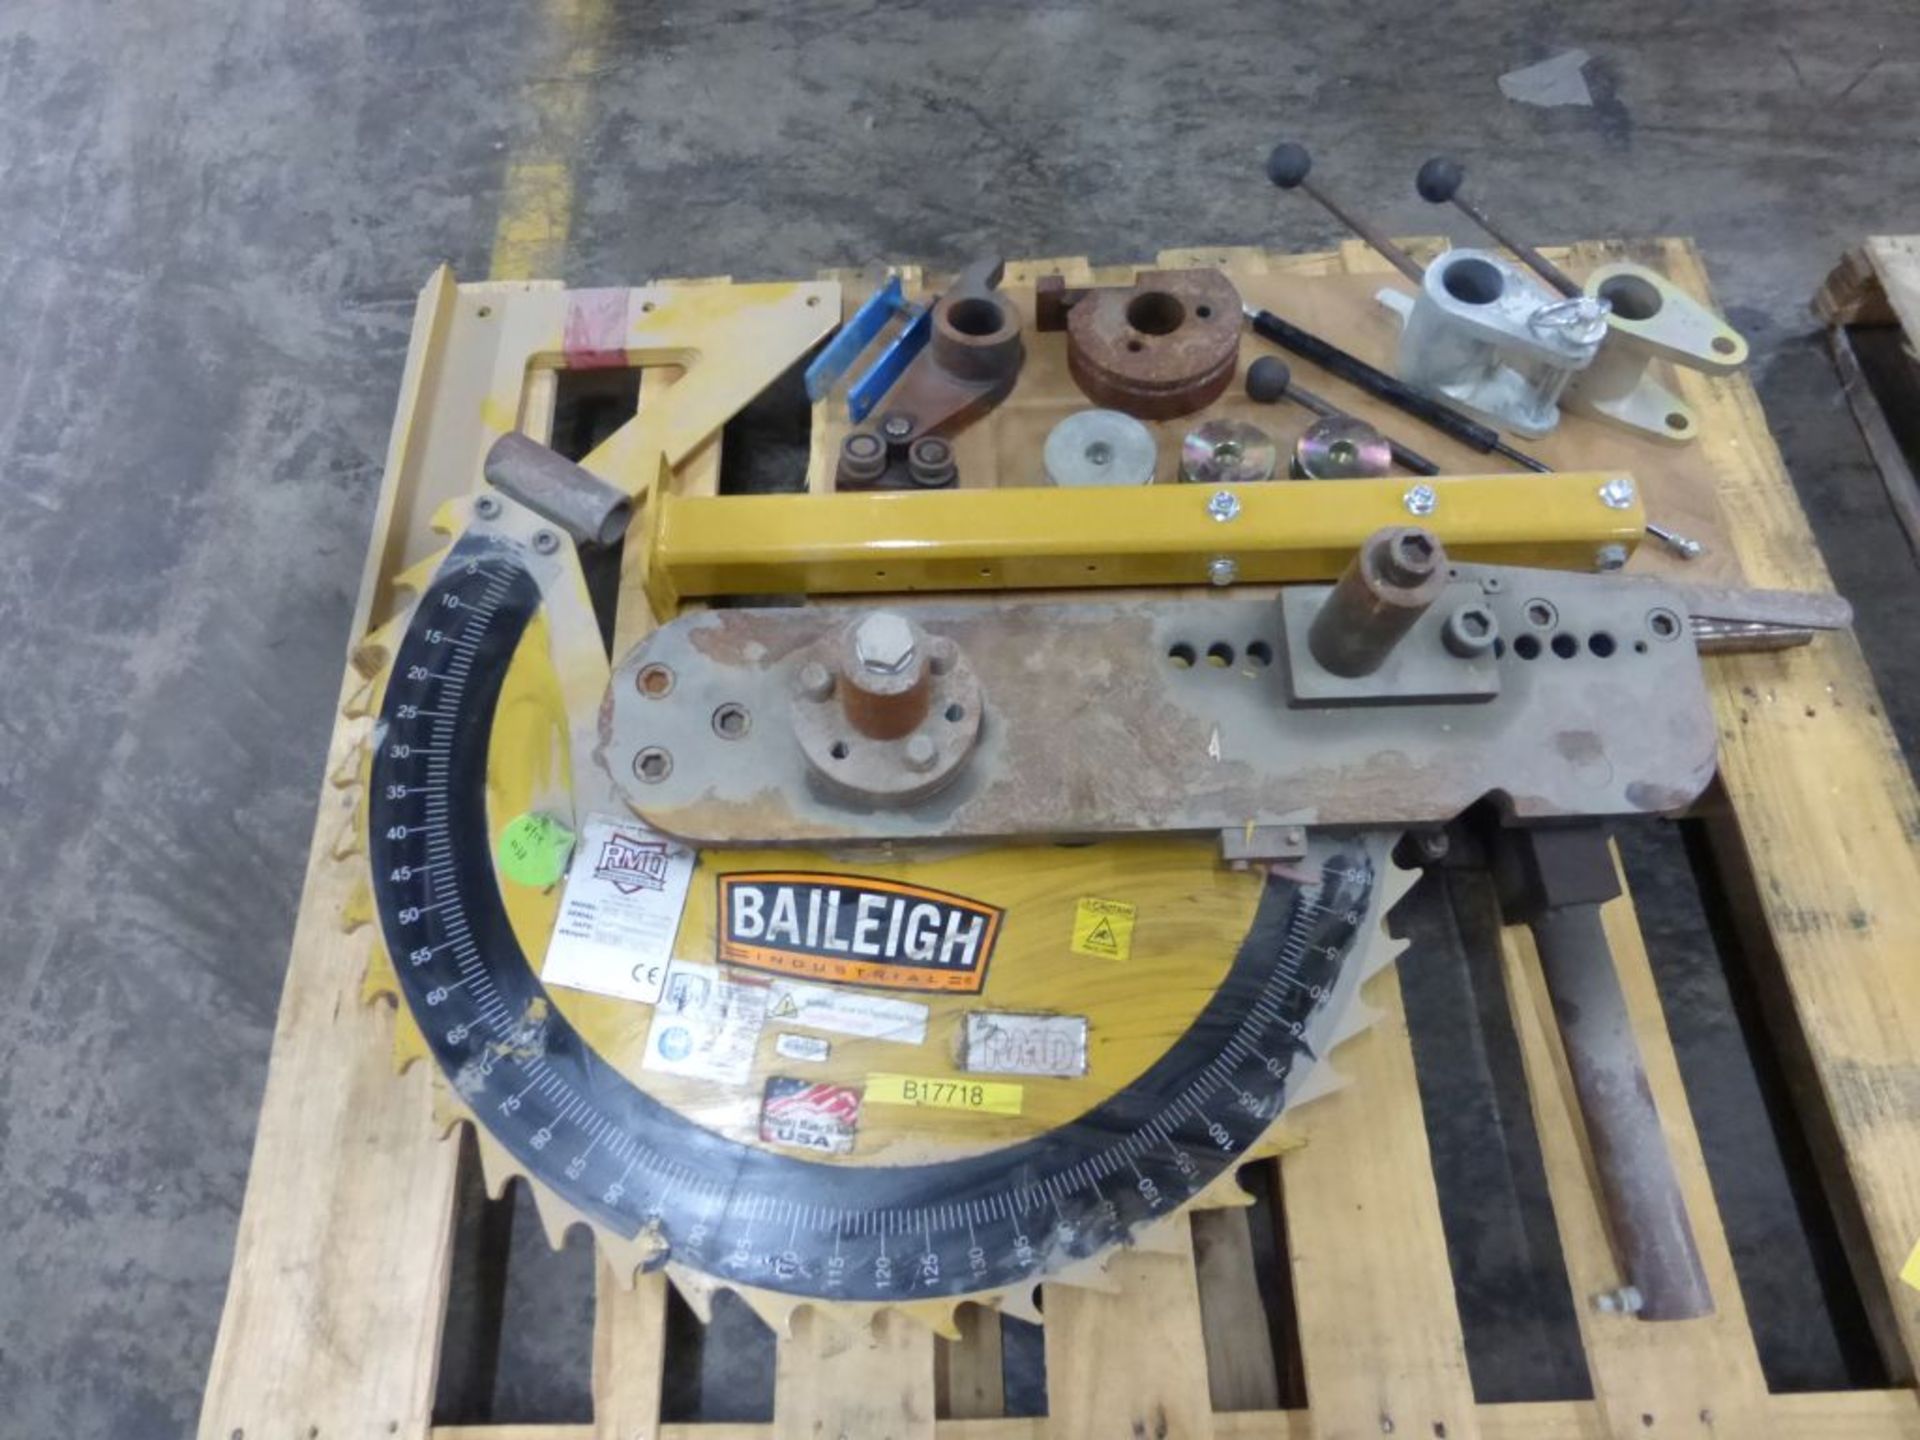 Baleigh Industrial Rotary Draw Bender w/Components